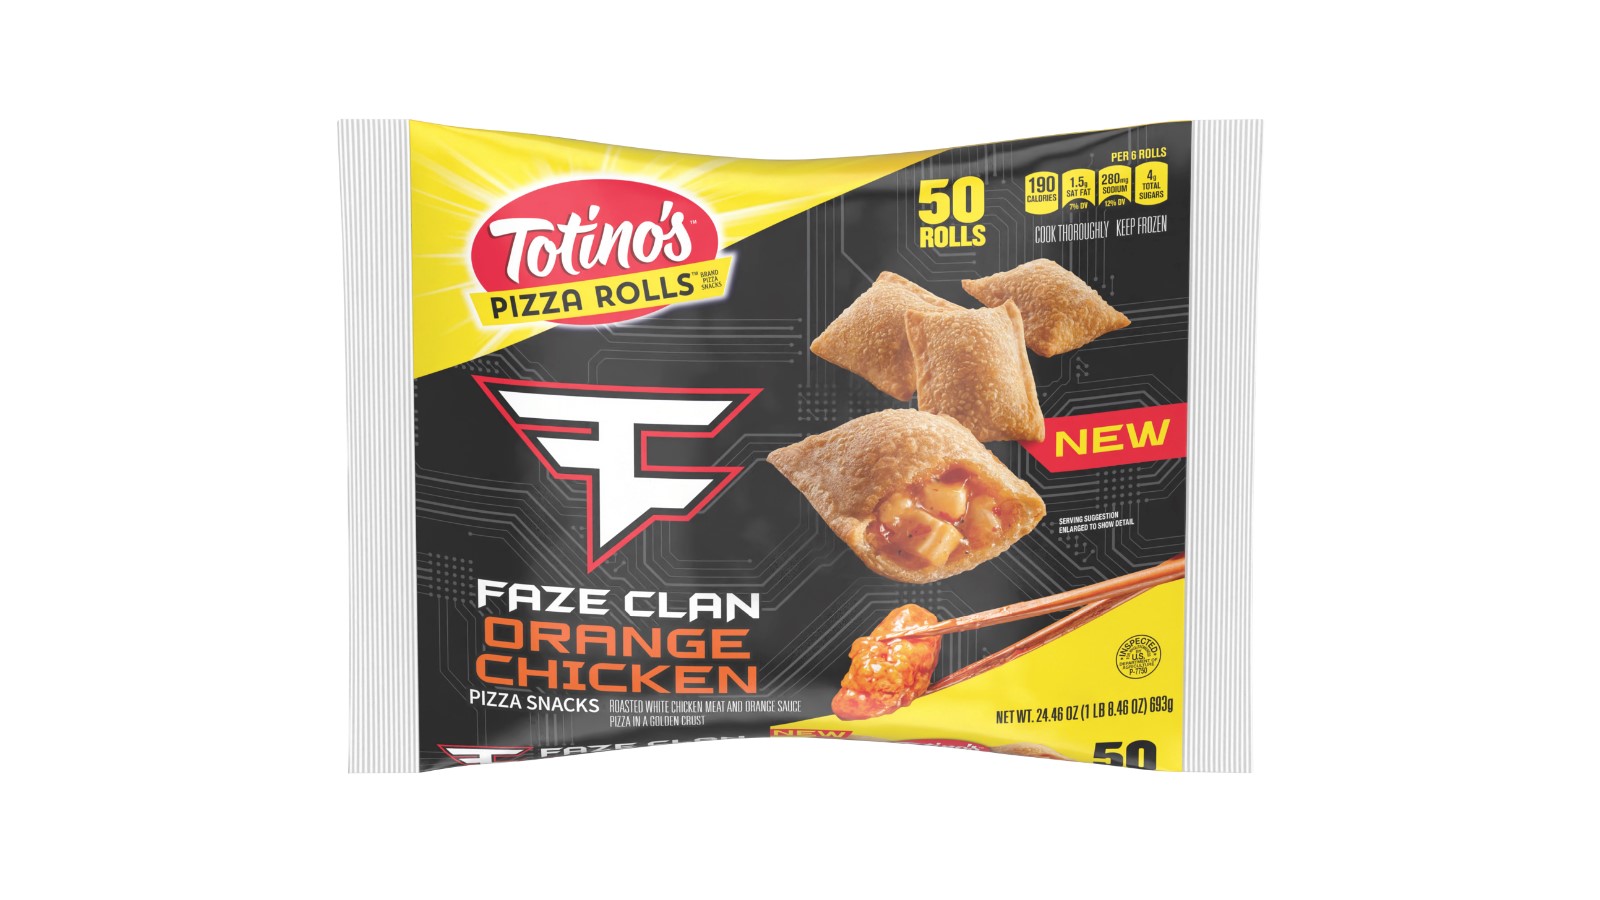 FaZe Clan and Totino’s team up to release NEW! Orange Chicken Pizza ...